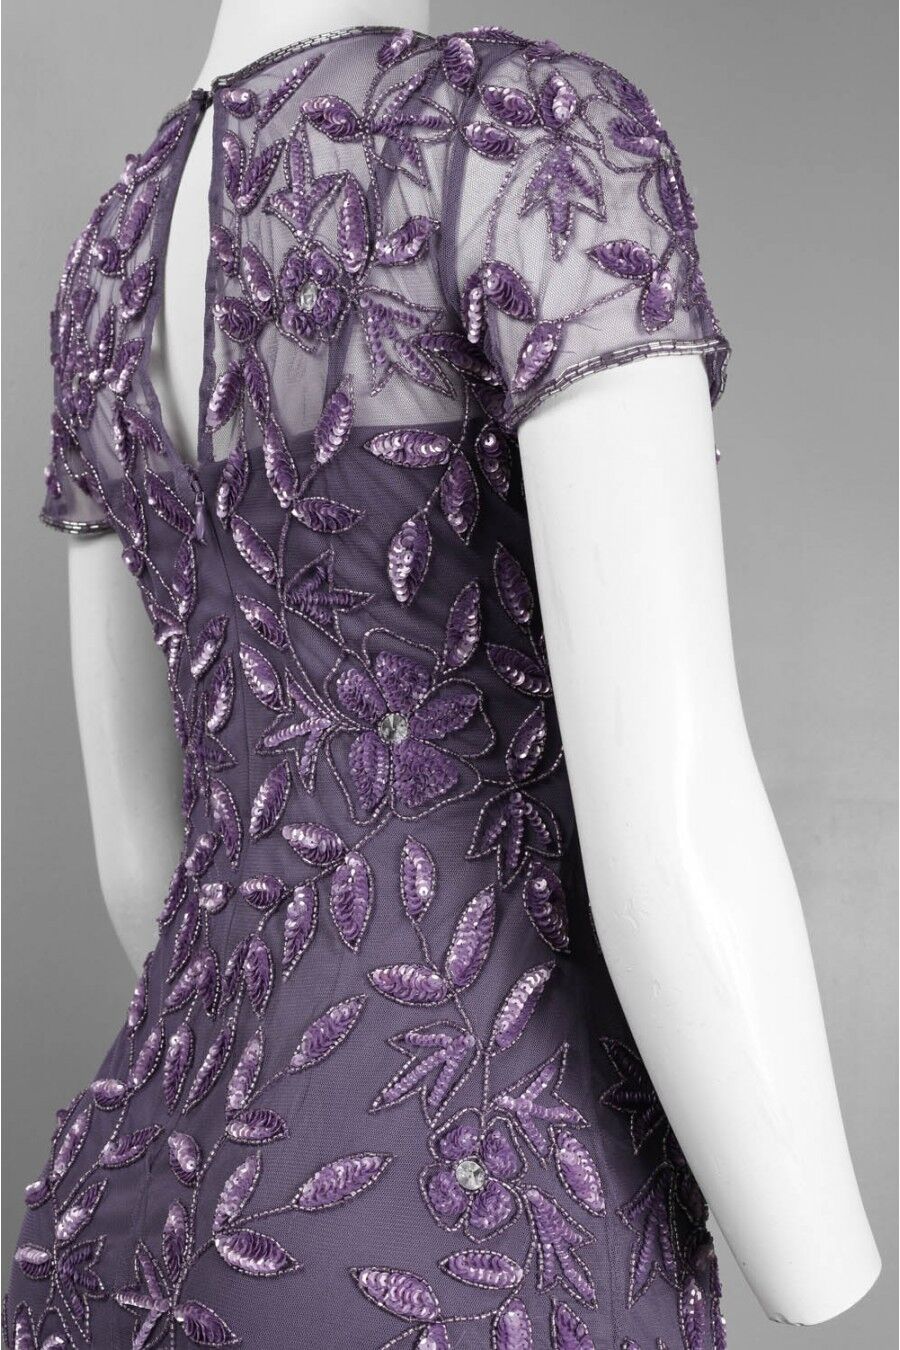 Pre-owned Adrianna Papell Dark Heather Purple Floral Beaded Godet Gown Size 4